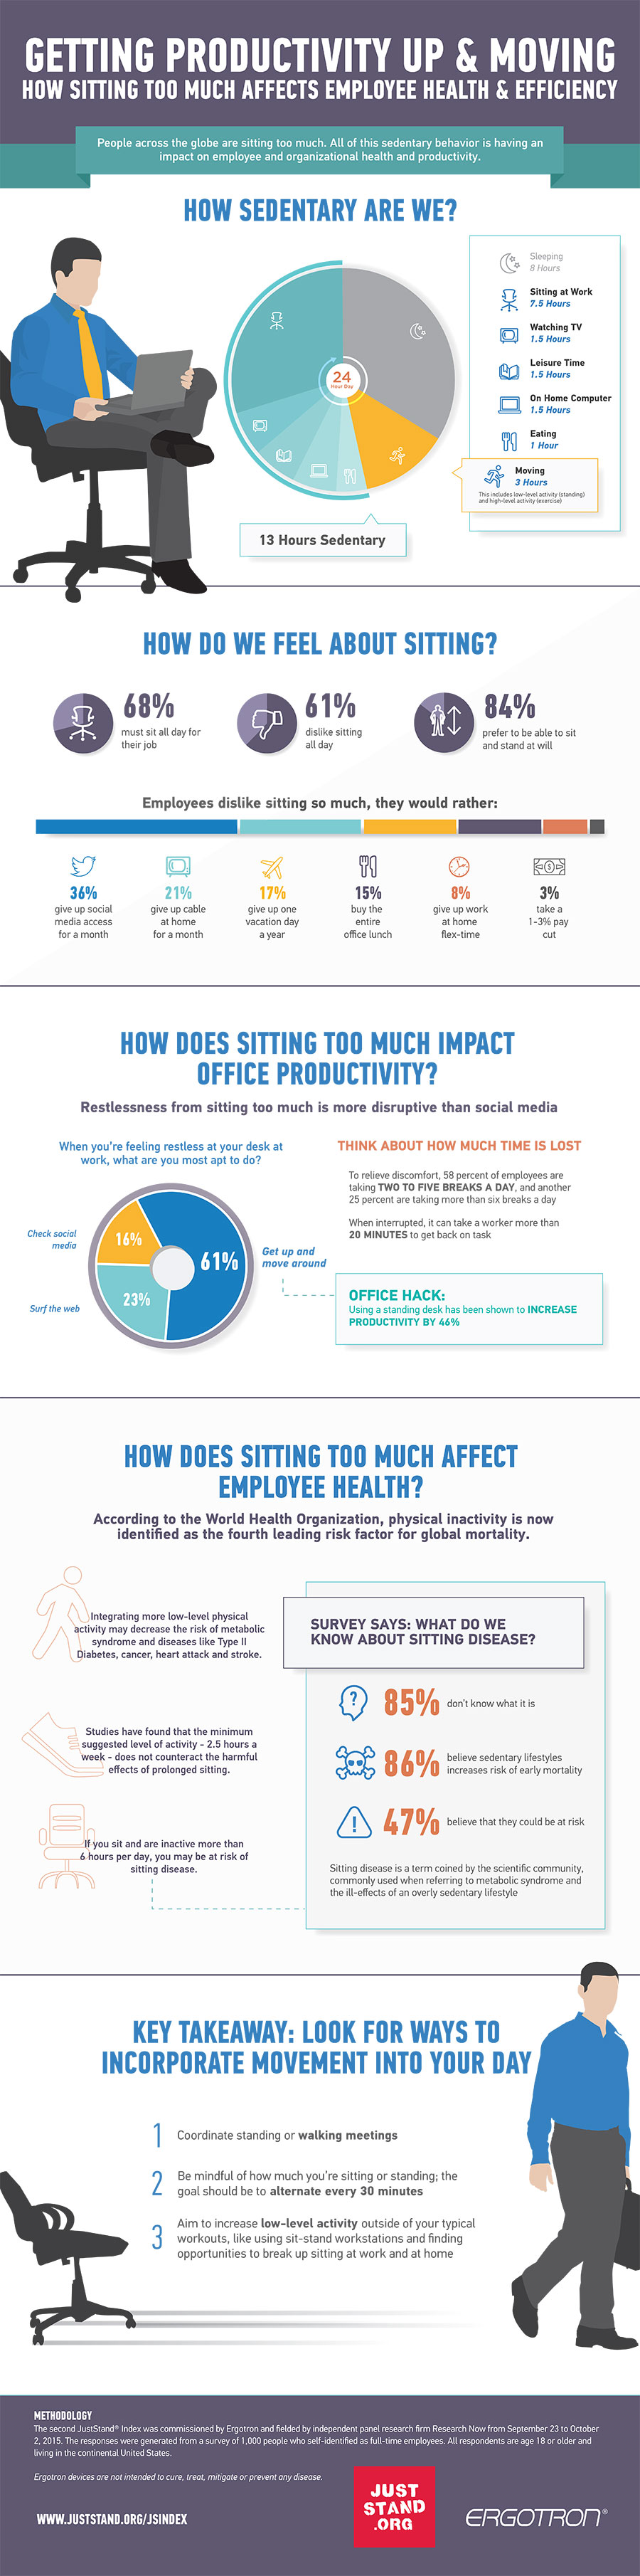 Getting Productivity Up and Moving